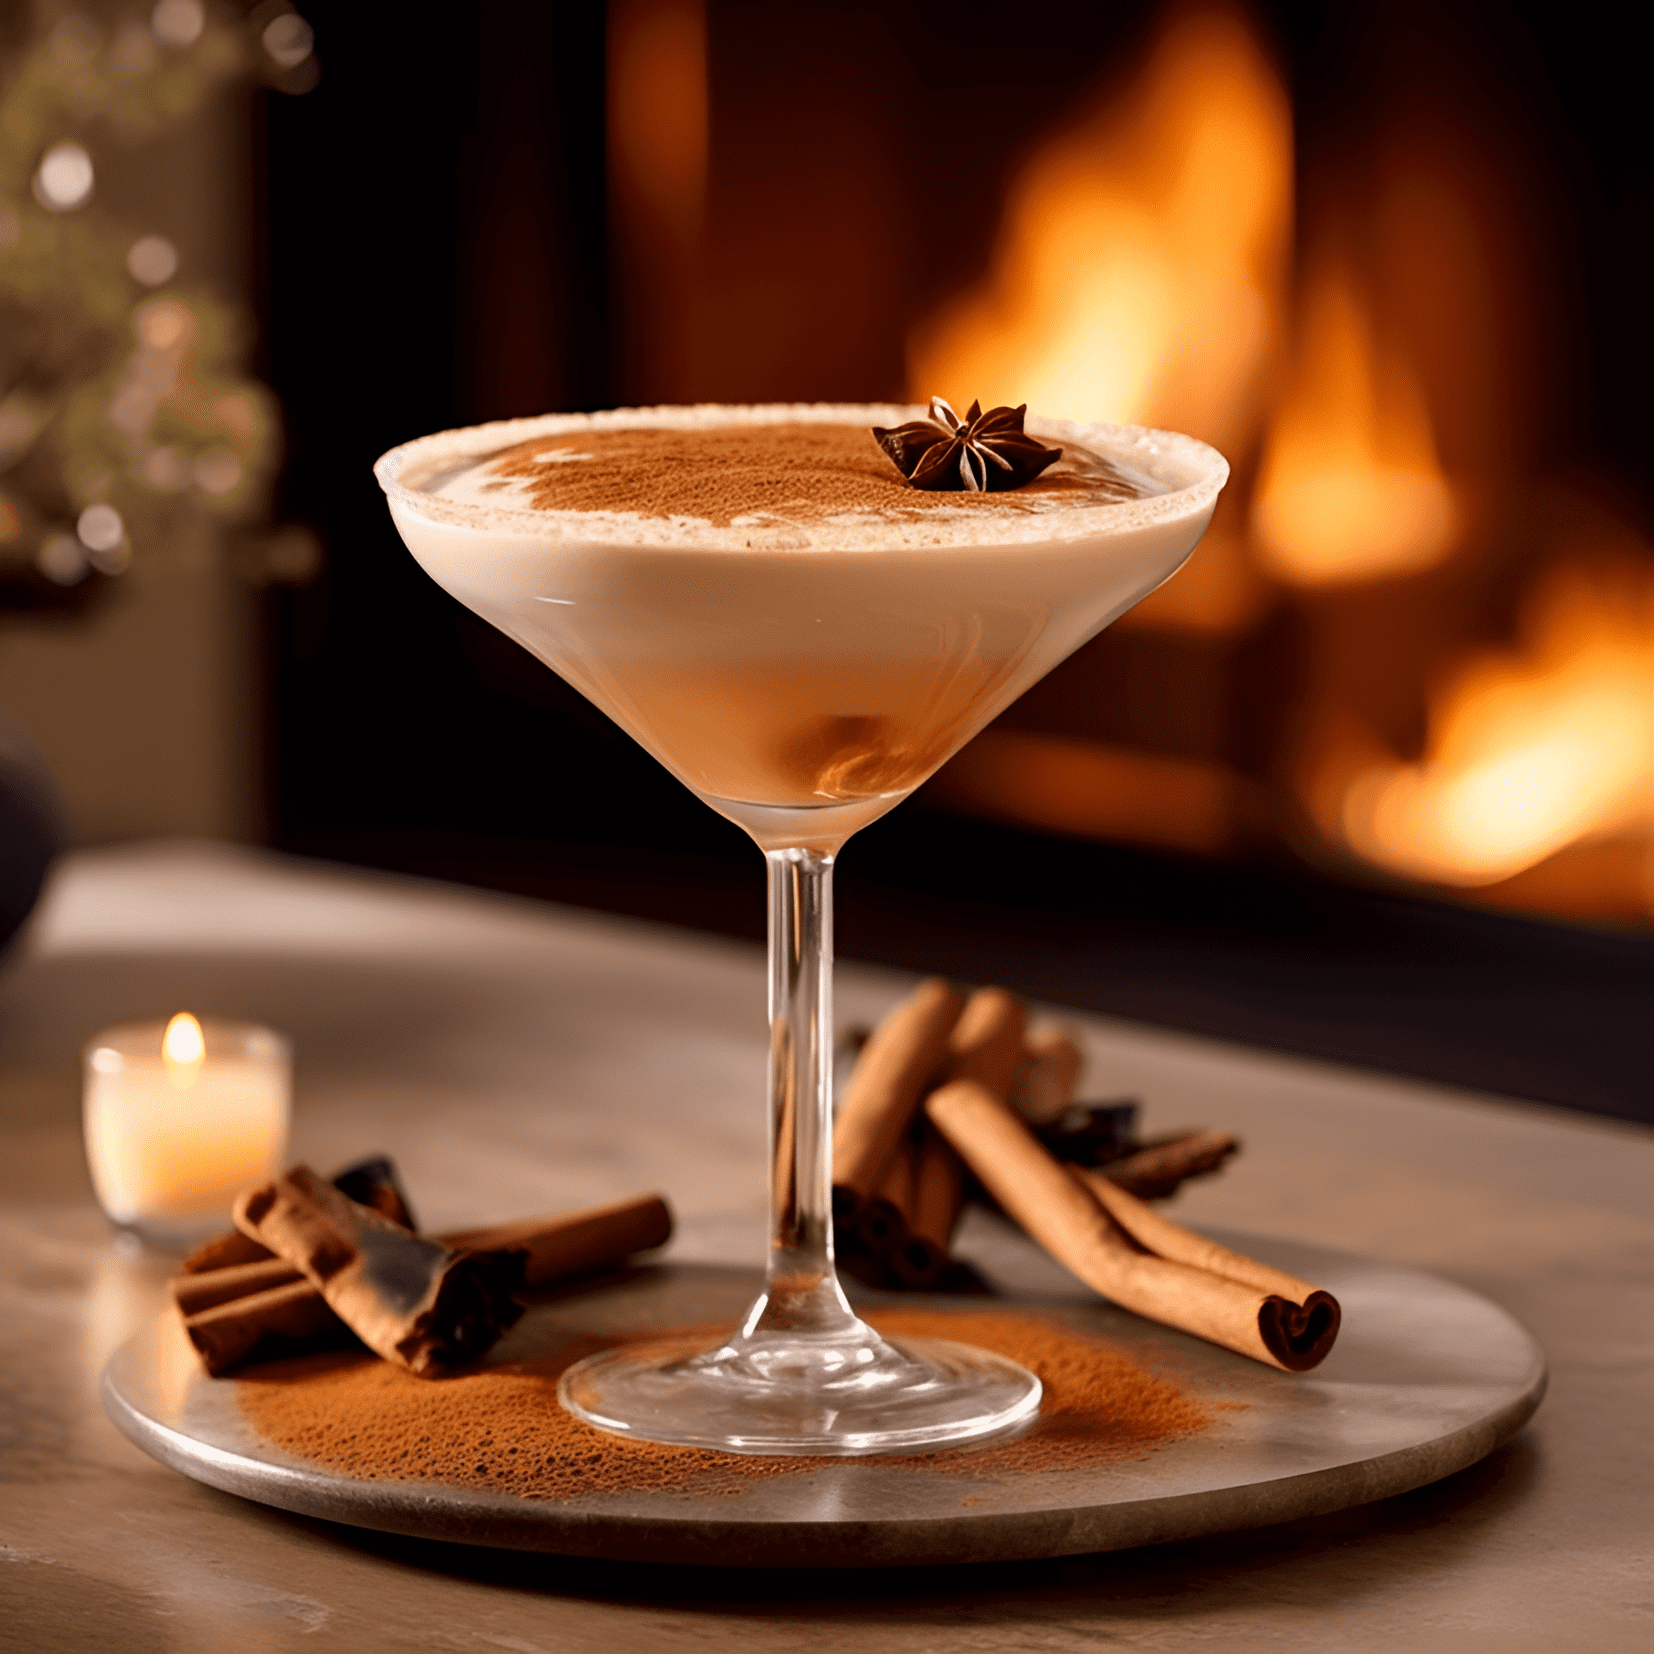 Cinnamon Toast Cocktail Recipe - The Cinnamon Toast cocktail is a delightful mix of sweet, creamy, and spicy flavors. The cinnamon adds a warm and comforting taste, while the cream liqueur provides a rich and velvety texture. The overall flavor is well-balanced and not too overpowering.